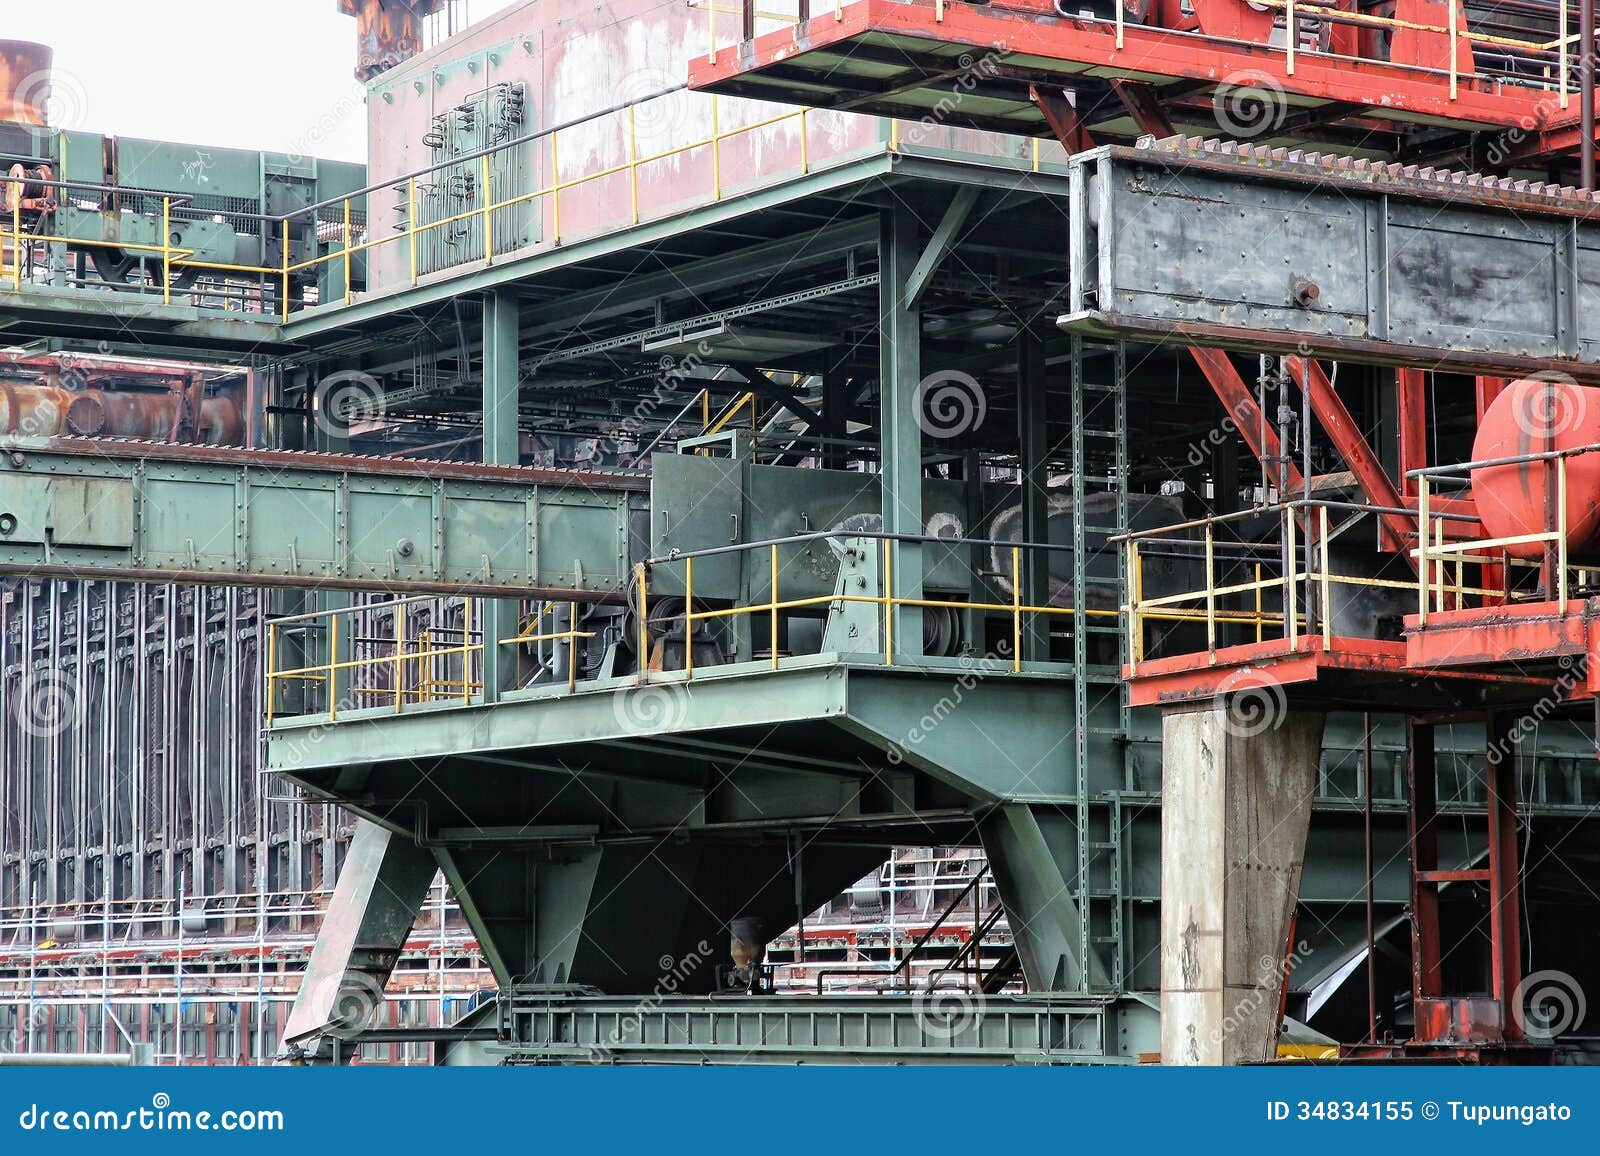 Industry In Europe Stock Image Image Of Exterior Europe